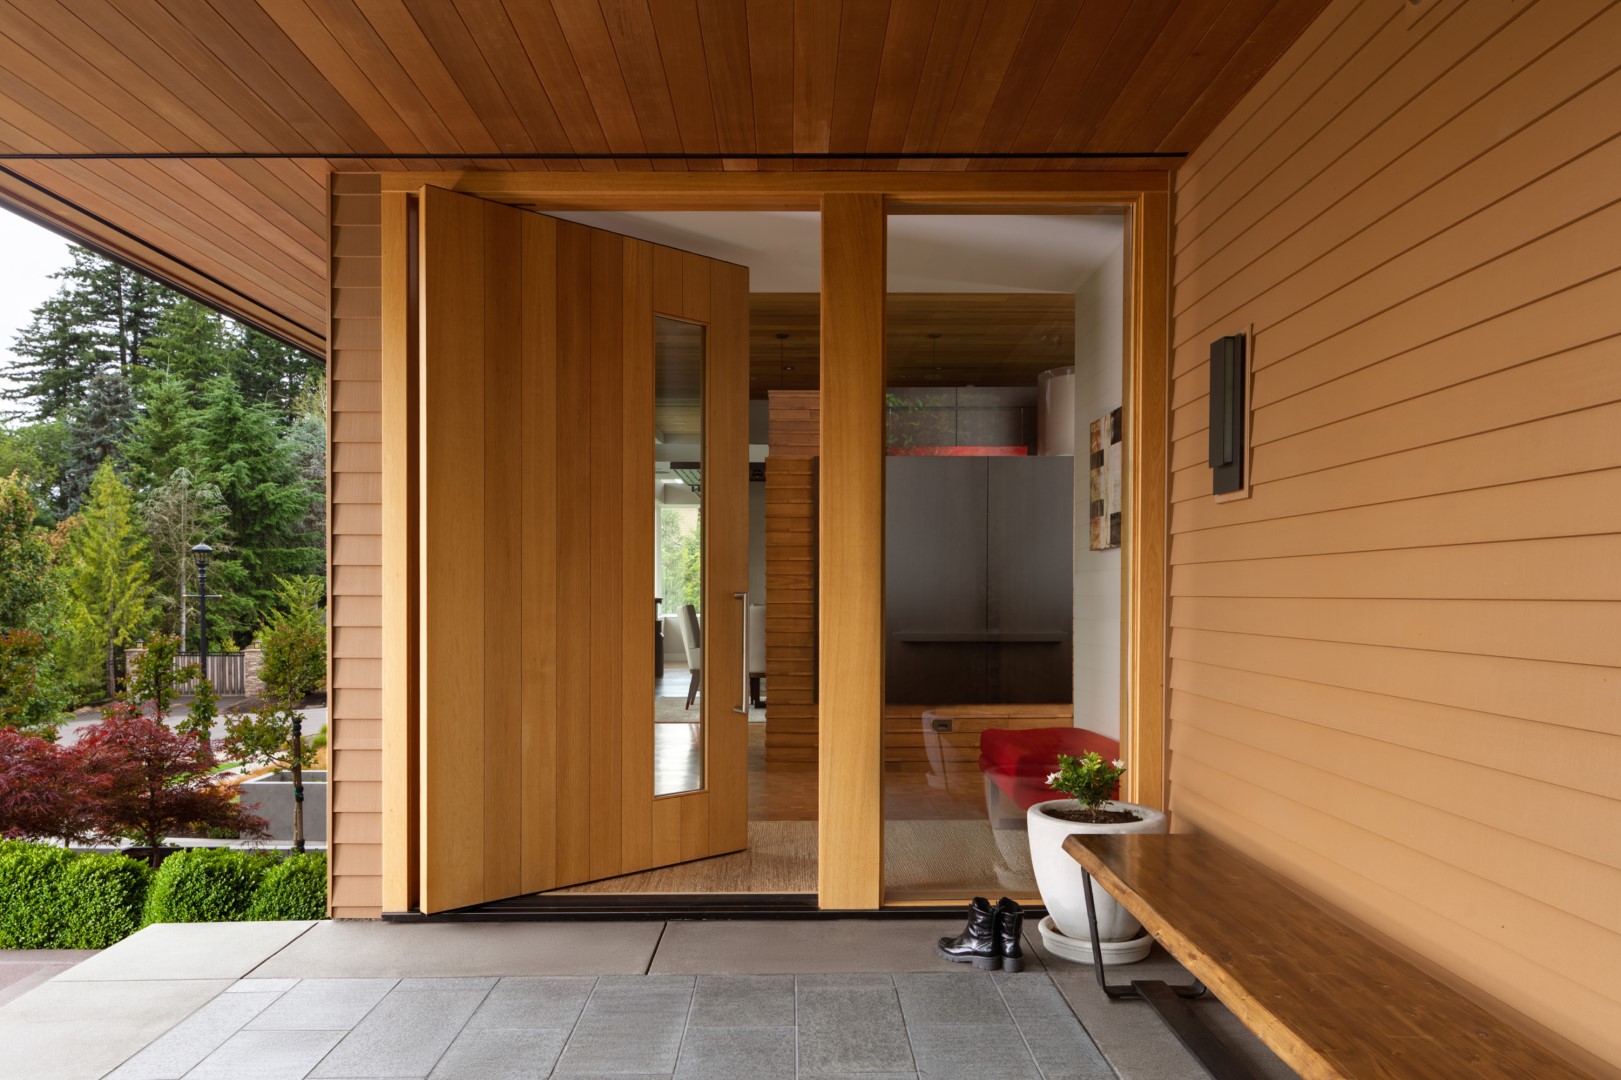 18 Captivating Contemporary Entrance Designs That Welcome in Style